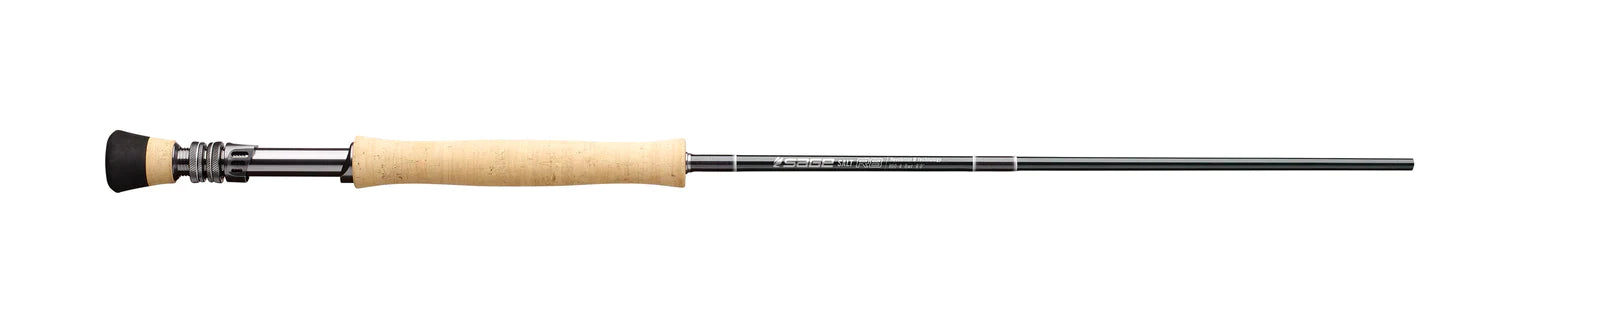 Sage SALT R8 15wt MARLIN Bluewater Fly Rod Combo Outfit - NEW!